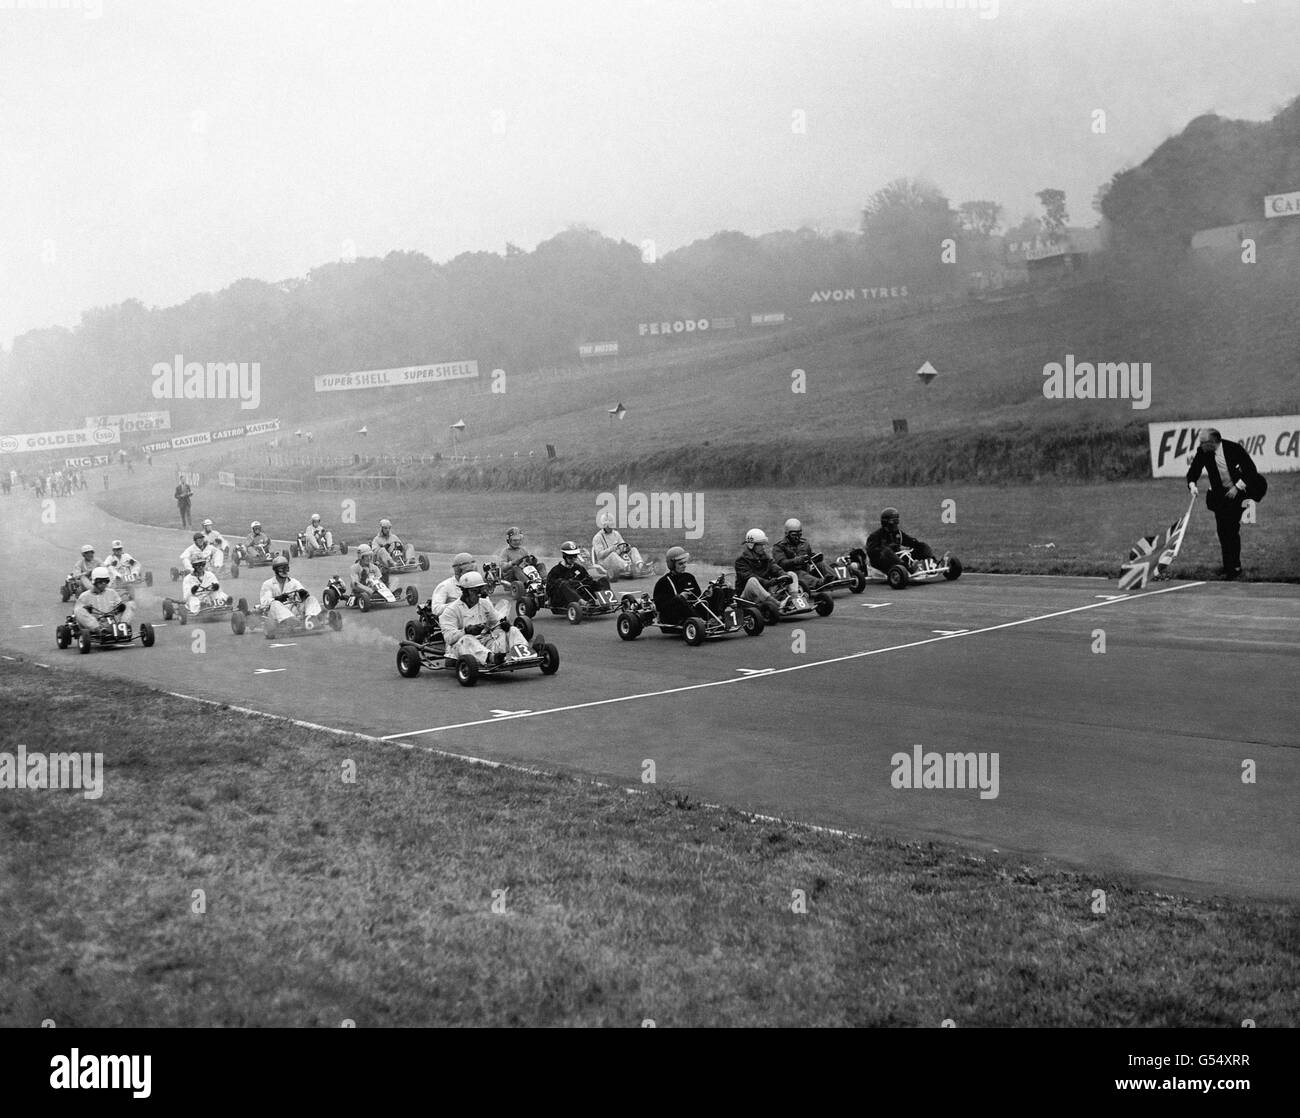 Motor Racing - British Kart Championship - Brands Hatch. The start of Event 1 for Class 1 cars won by John Brise (13) in a Brise Trak kart. Stock Photo